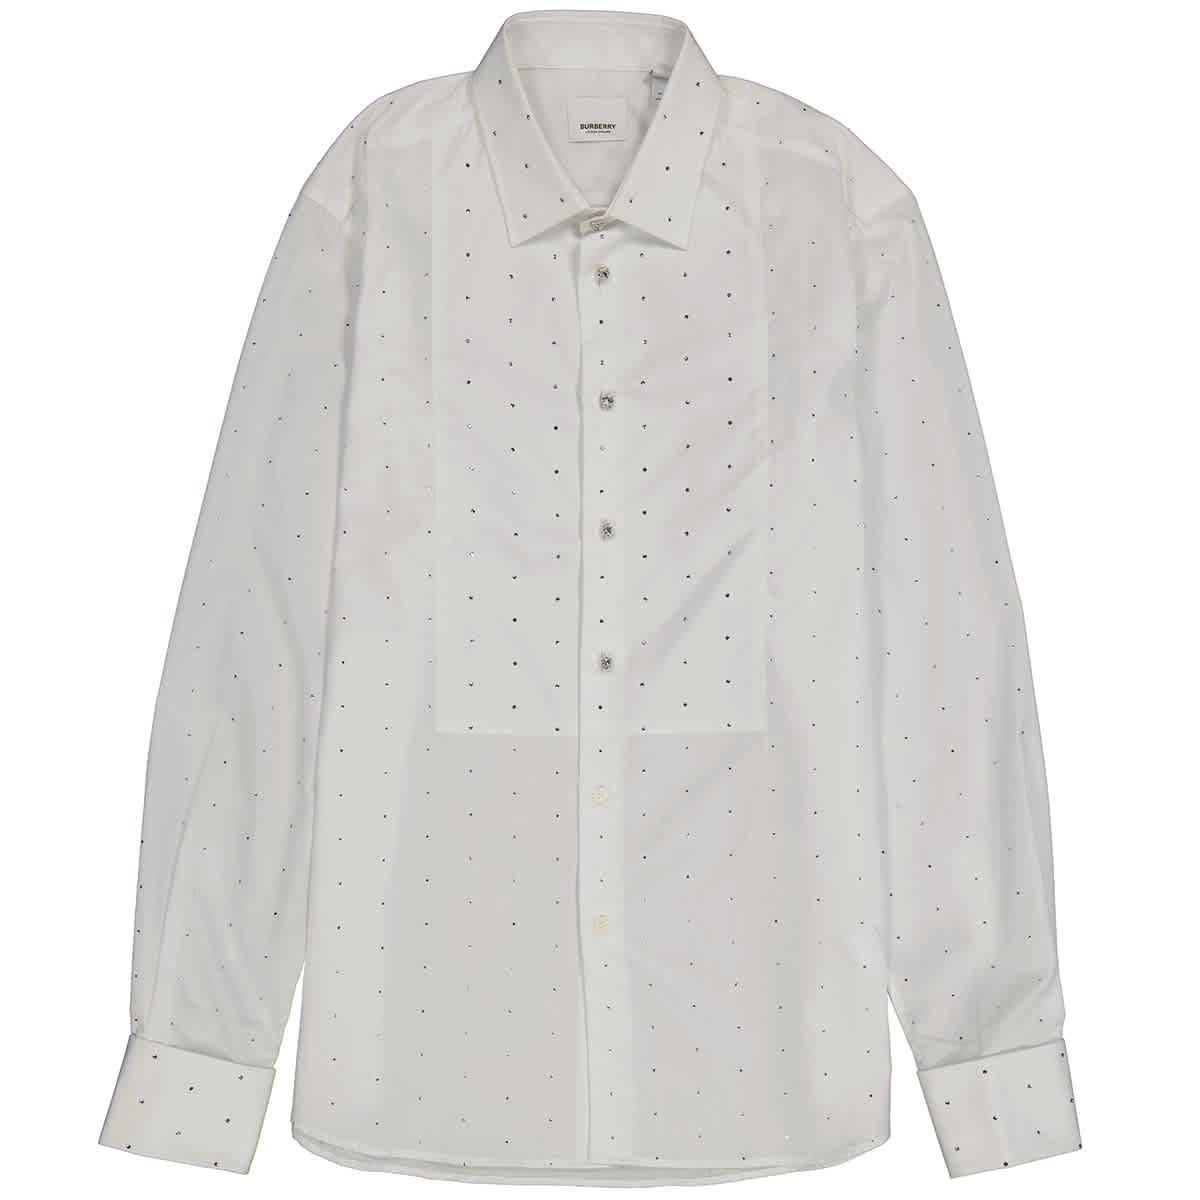 Burberry Mens White Cotton Poplin Embellished Dress Shirt by BURBERRY